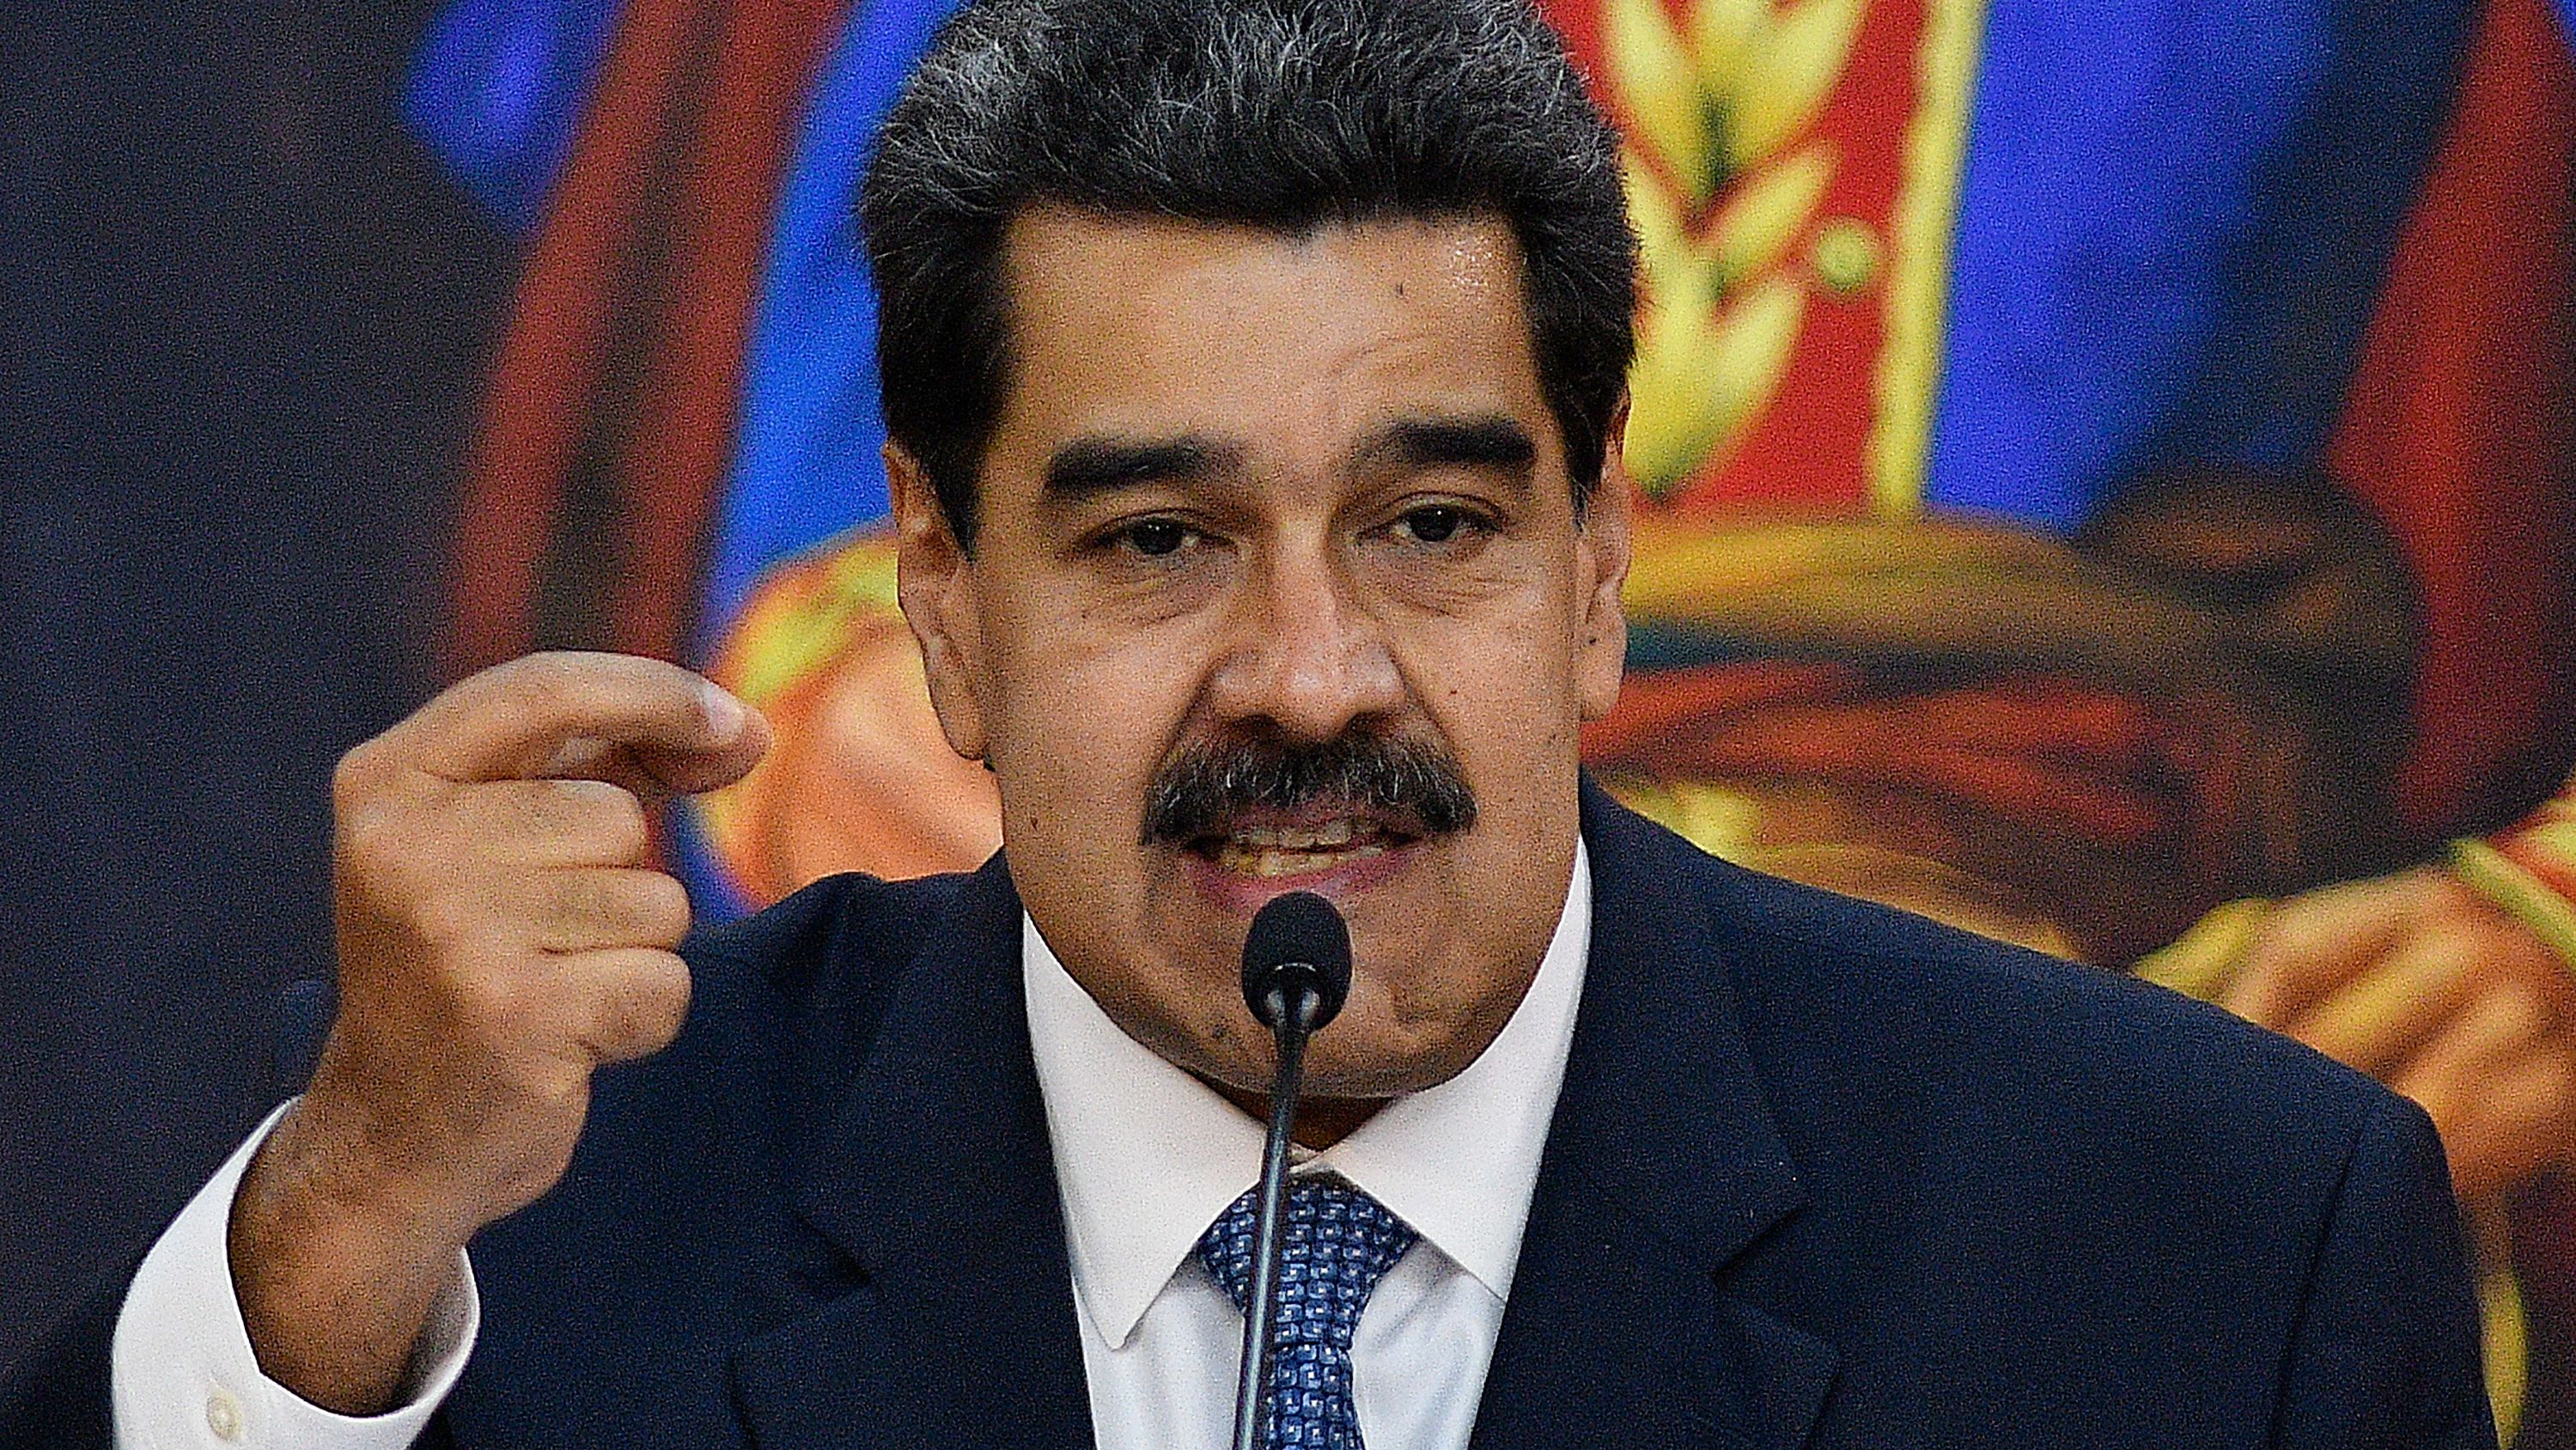 President Nicolas Maduro is under criticism from international leaders who call his election a sham.